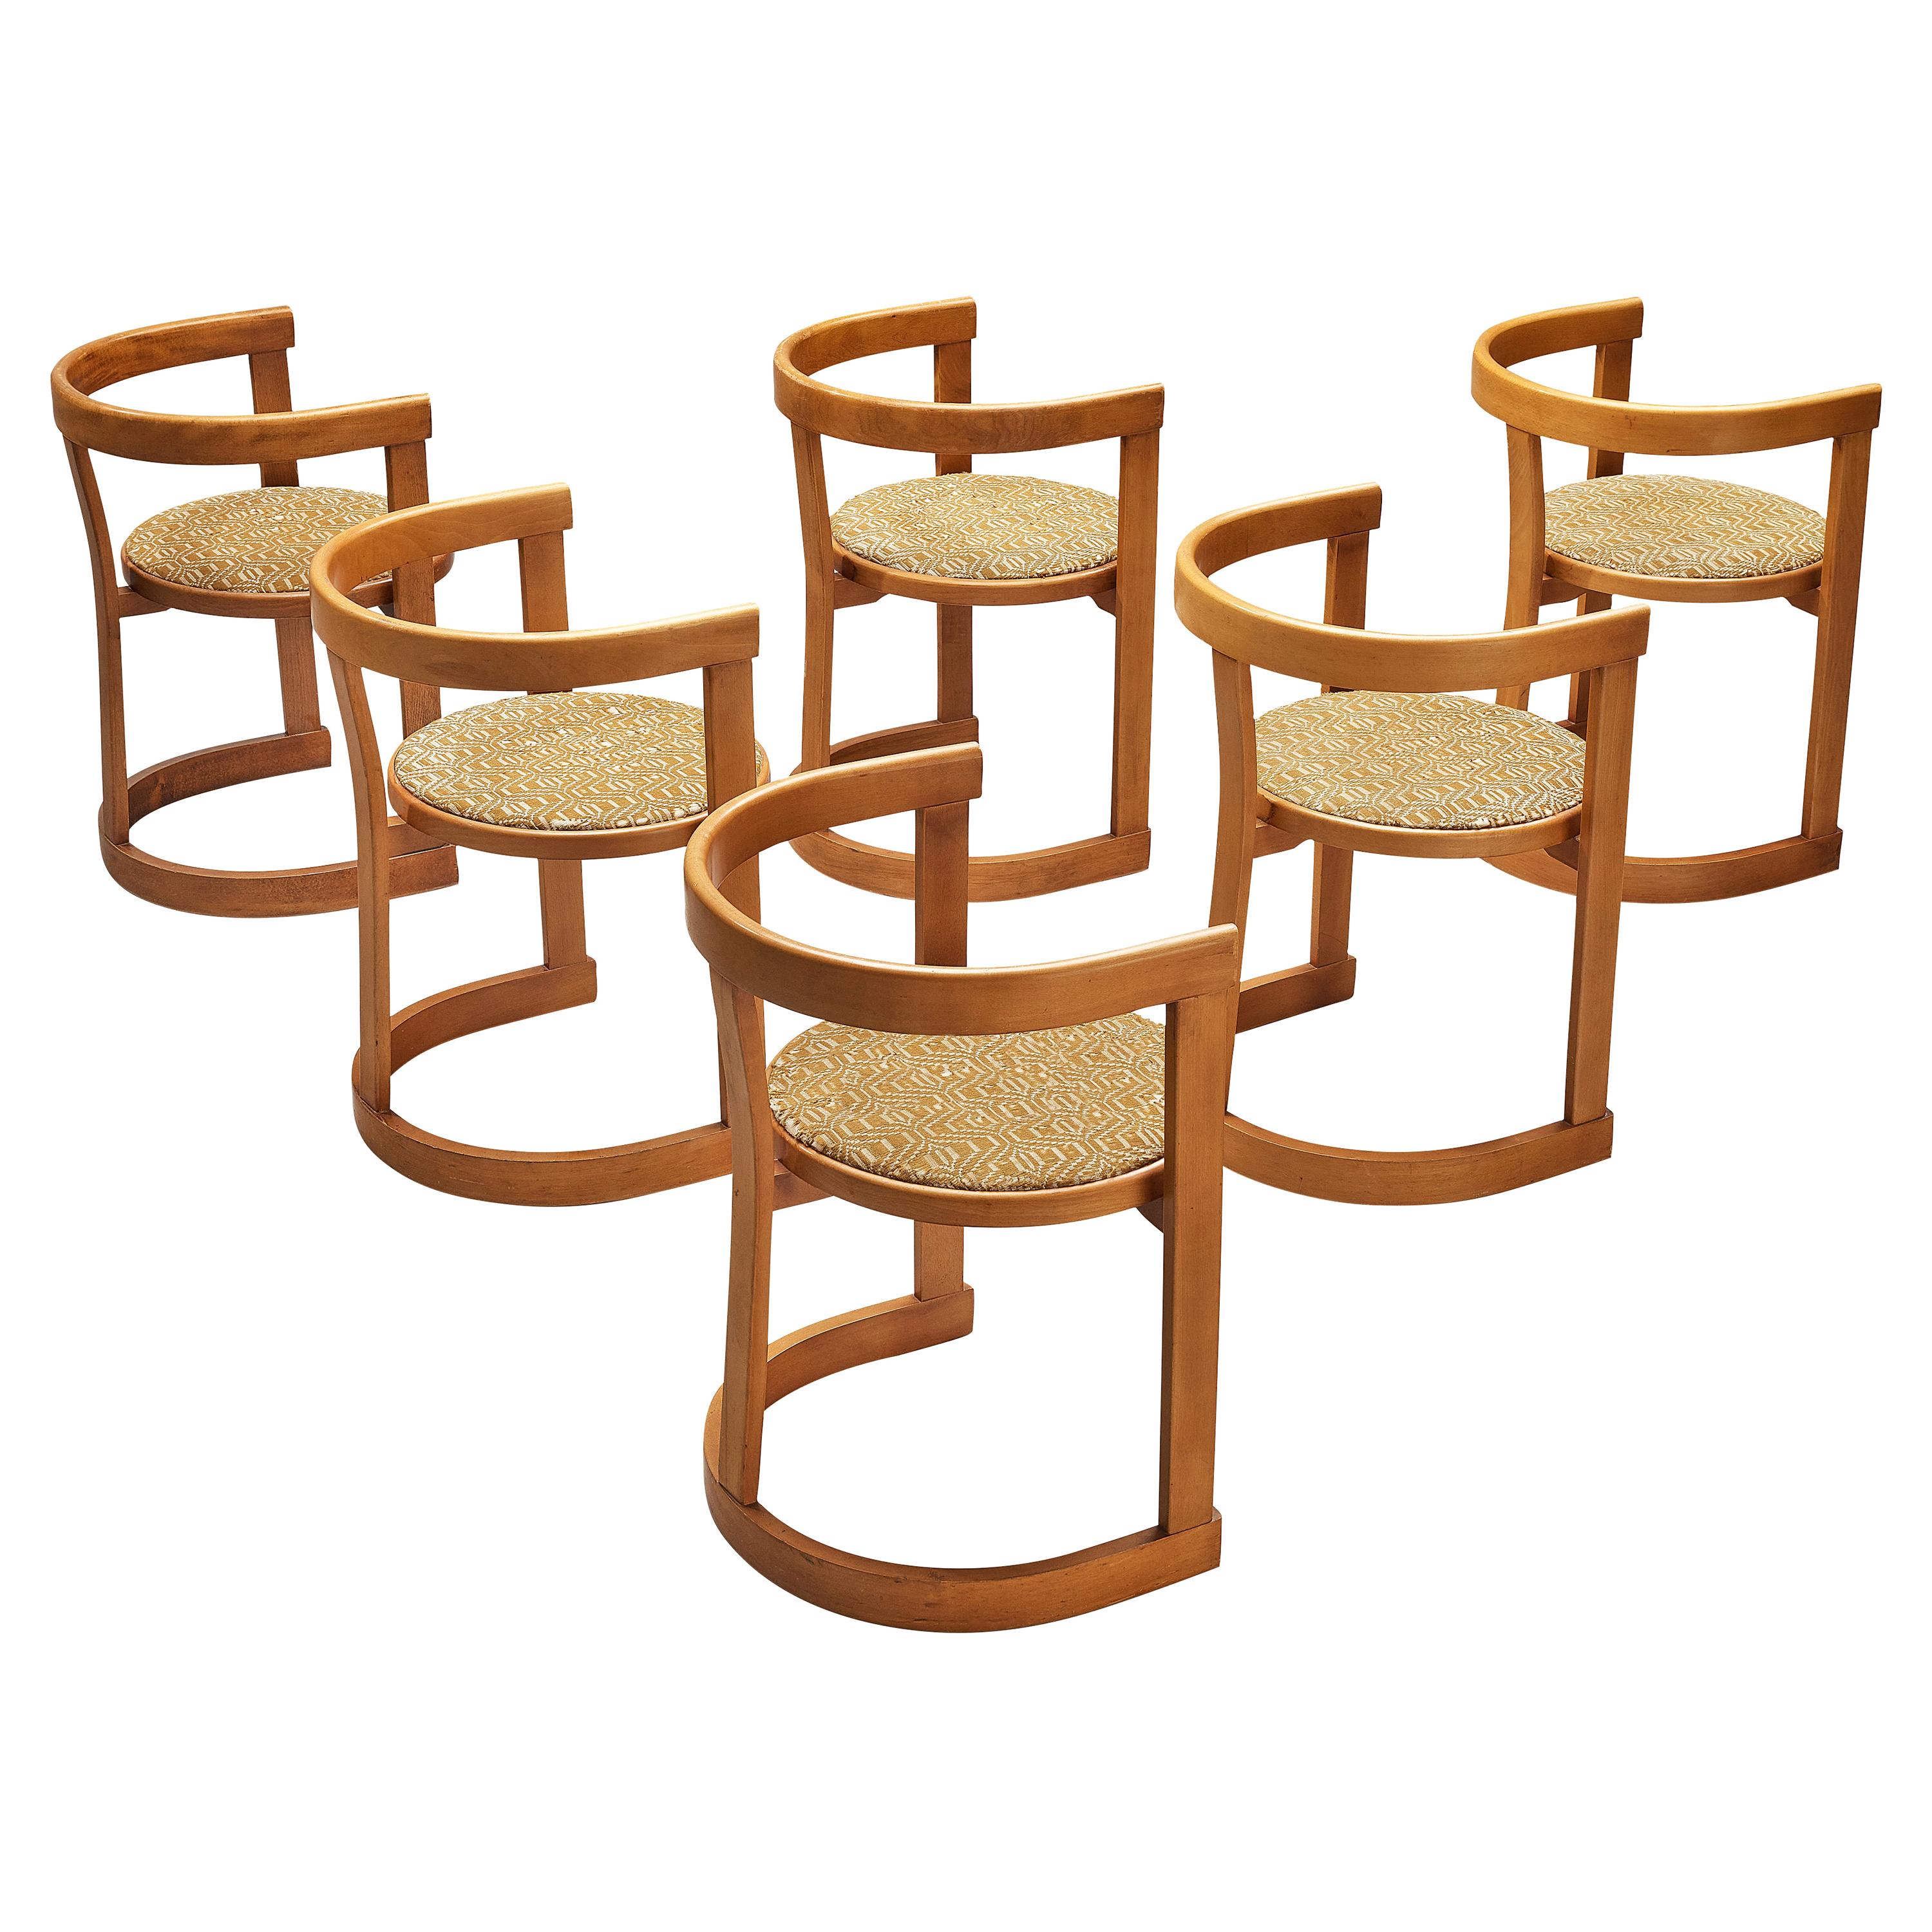 Italian Set of Six Dining Chairs in Beech and Beige Patterned Upholstery